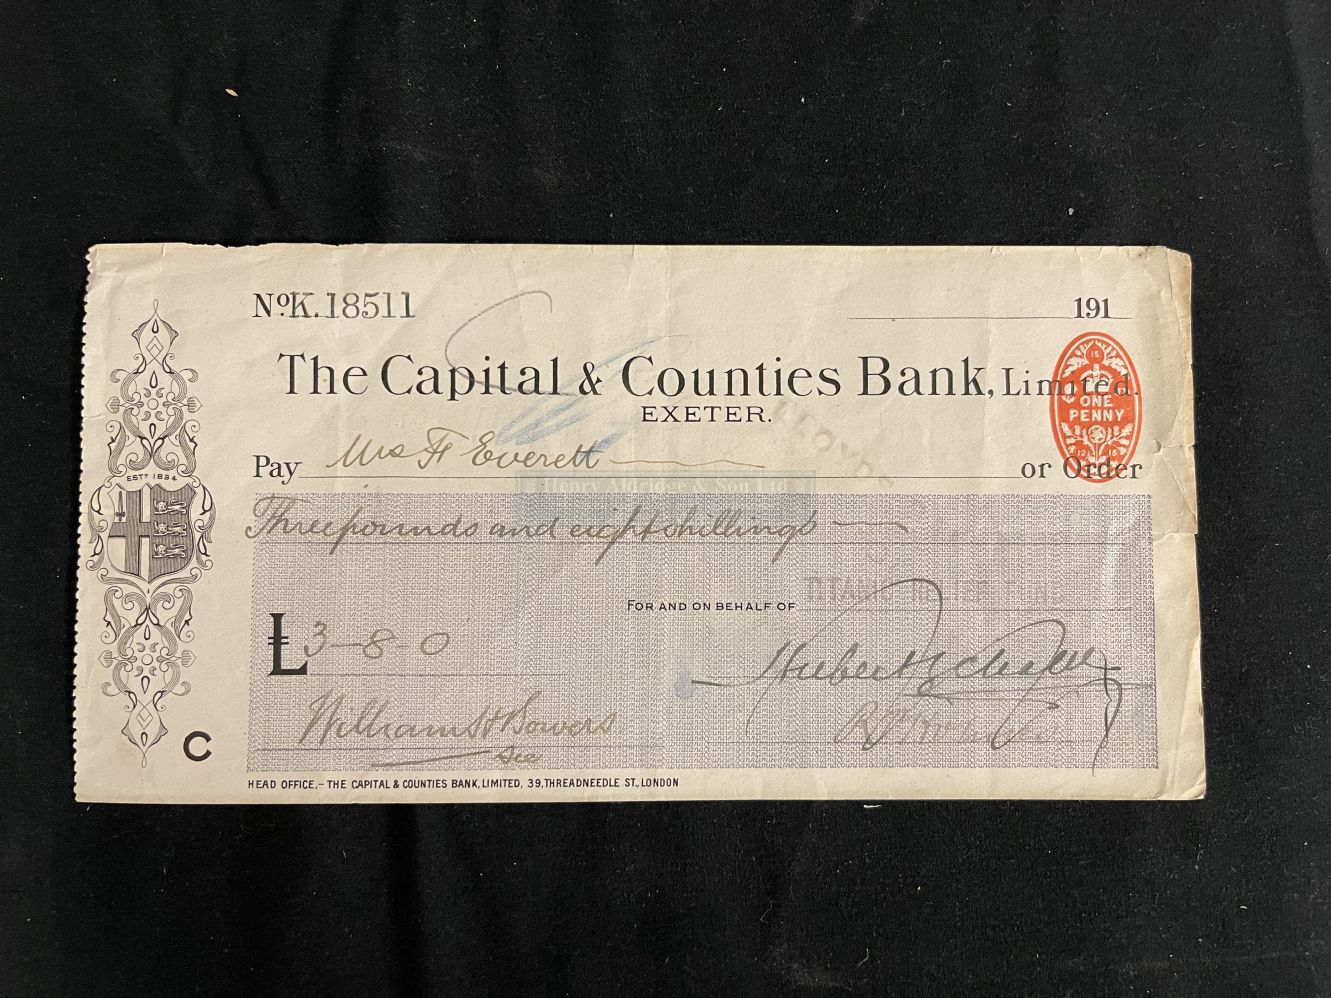 R.M.S. TITANIC: Titanic Disaster Relief Fund cheque, payable to Mrs F. Everett.